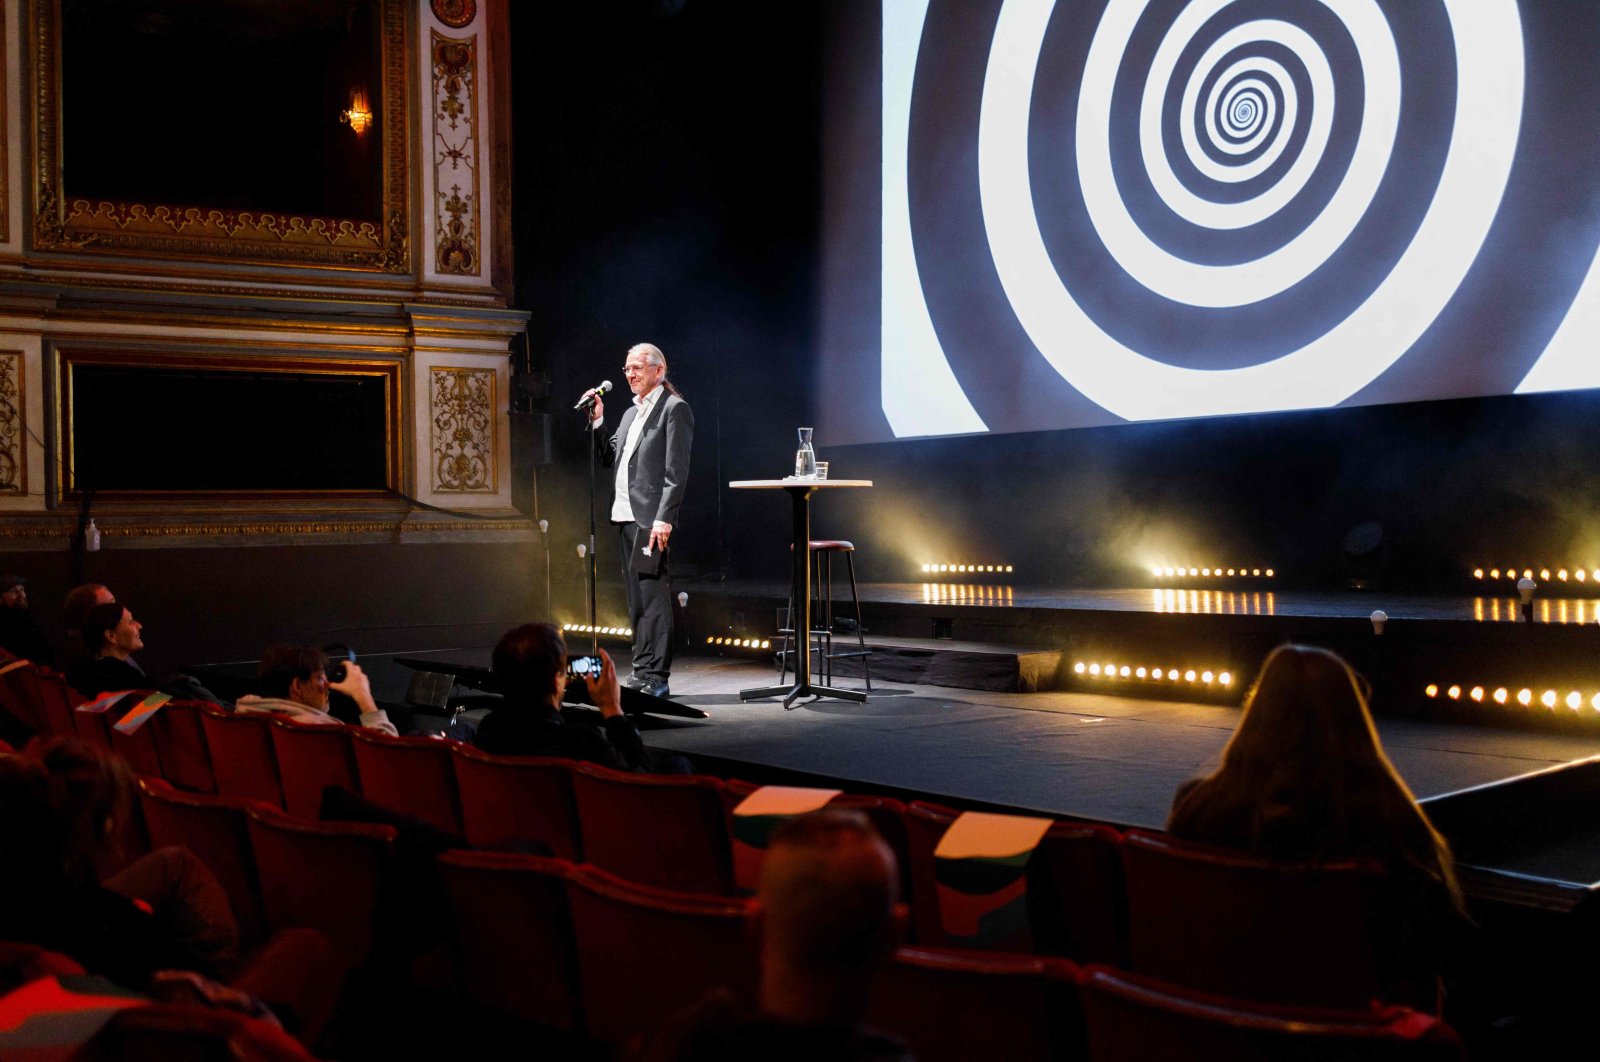 This handout photo made available by the Goteborg Film Festival shows hypnotist Fredrik Praesto addressing the audience prior to the first screening of the Hypnotic Cinema at the Stora Teatern in Gothenburg, Sweden, Jan. 30, 2022. (AFP)